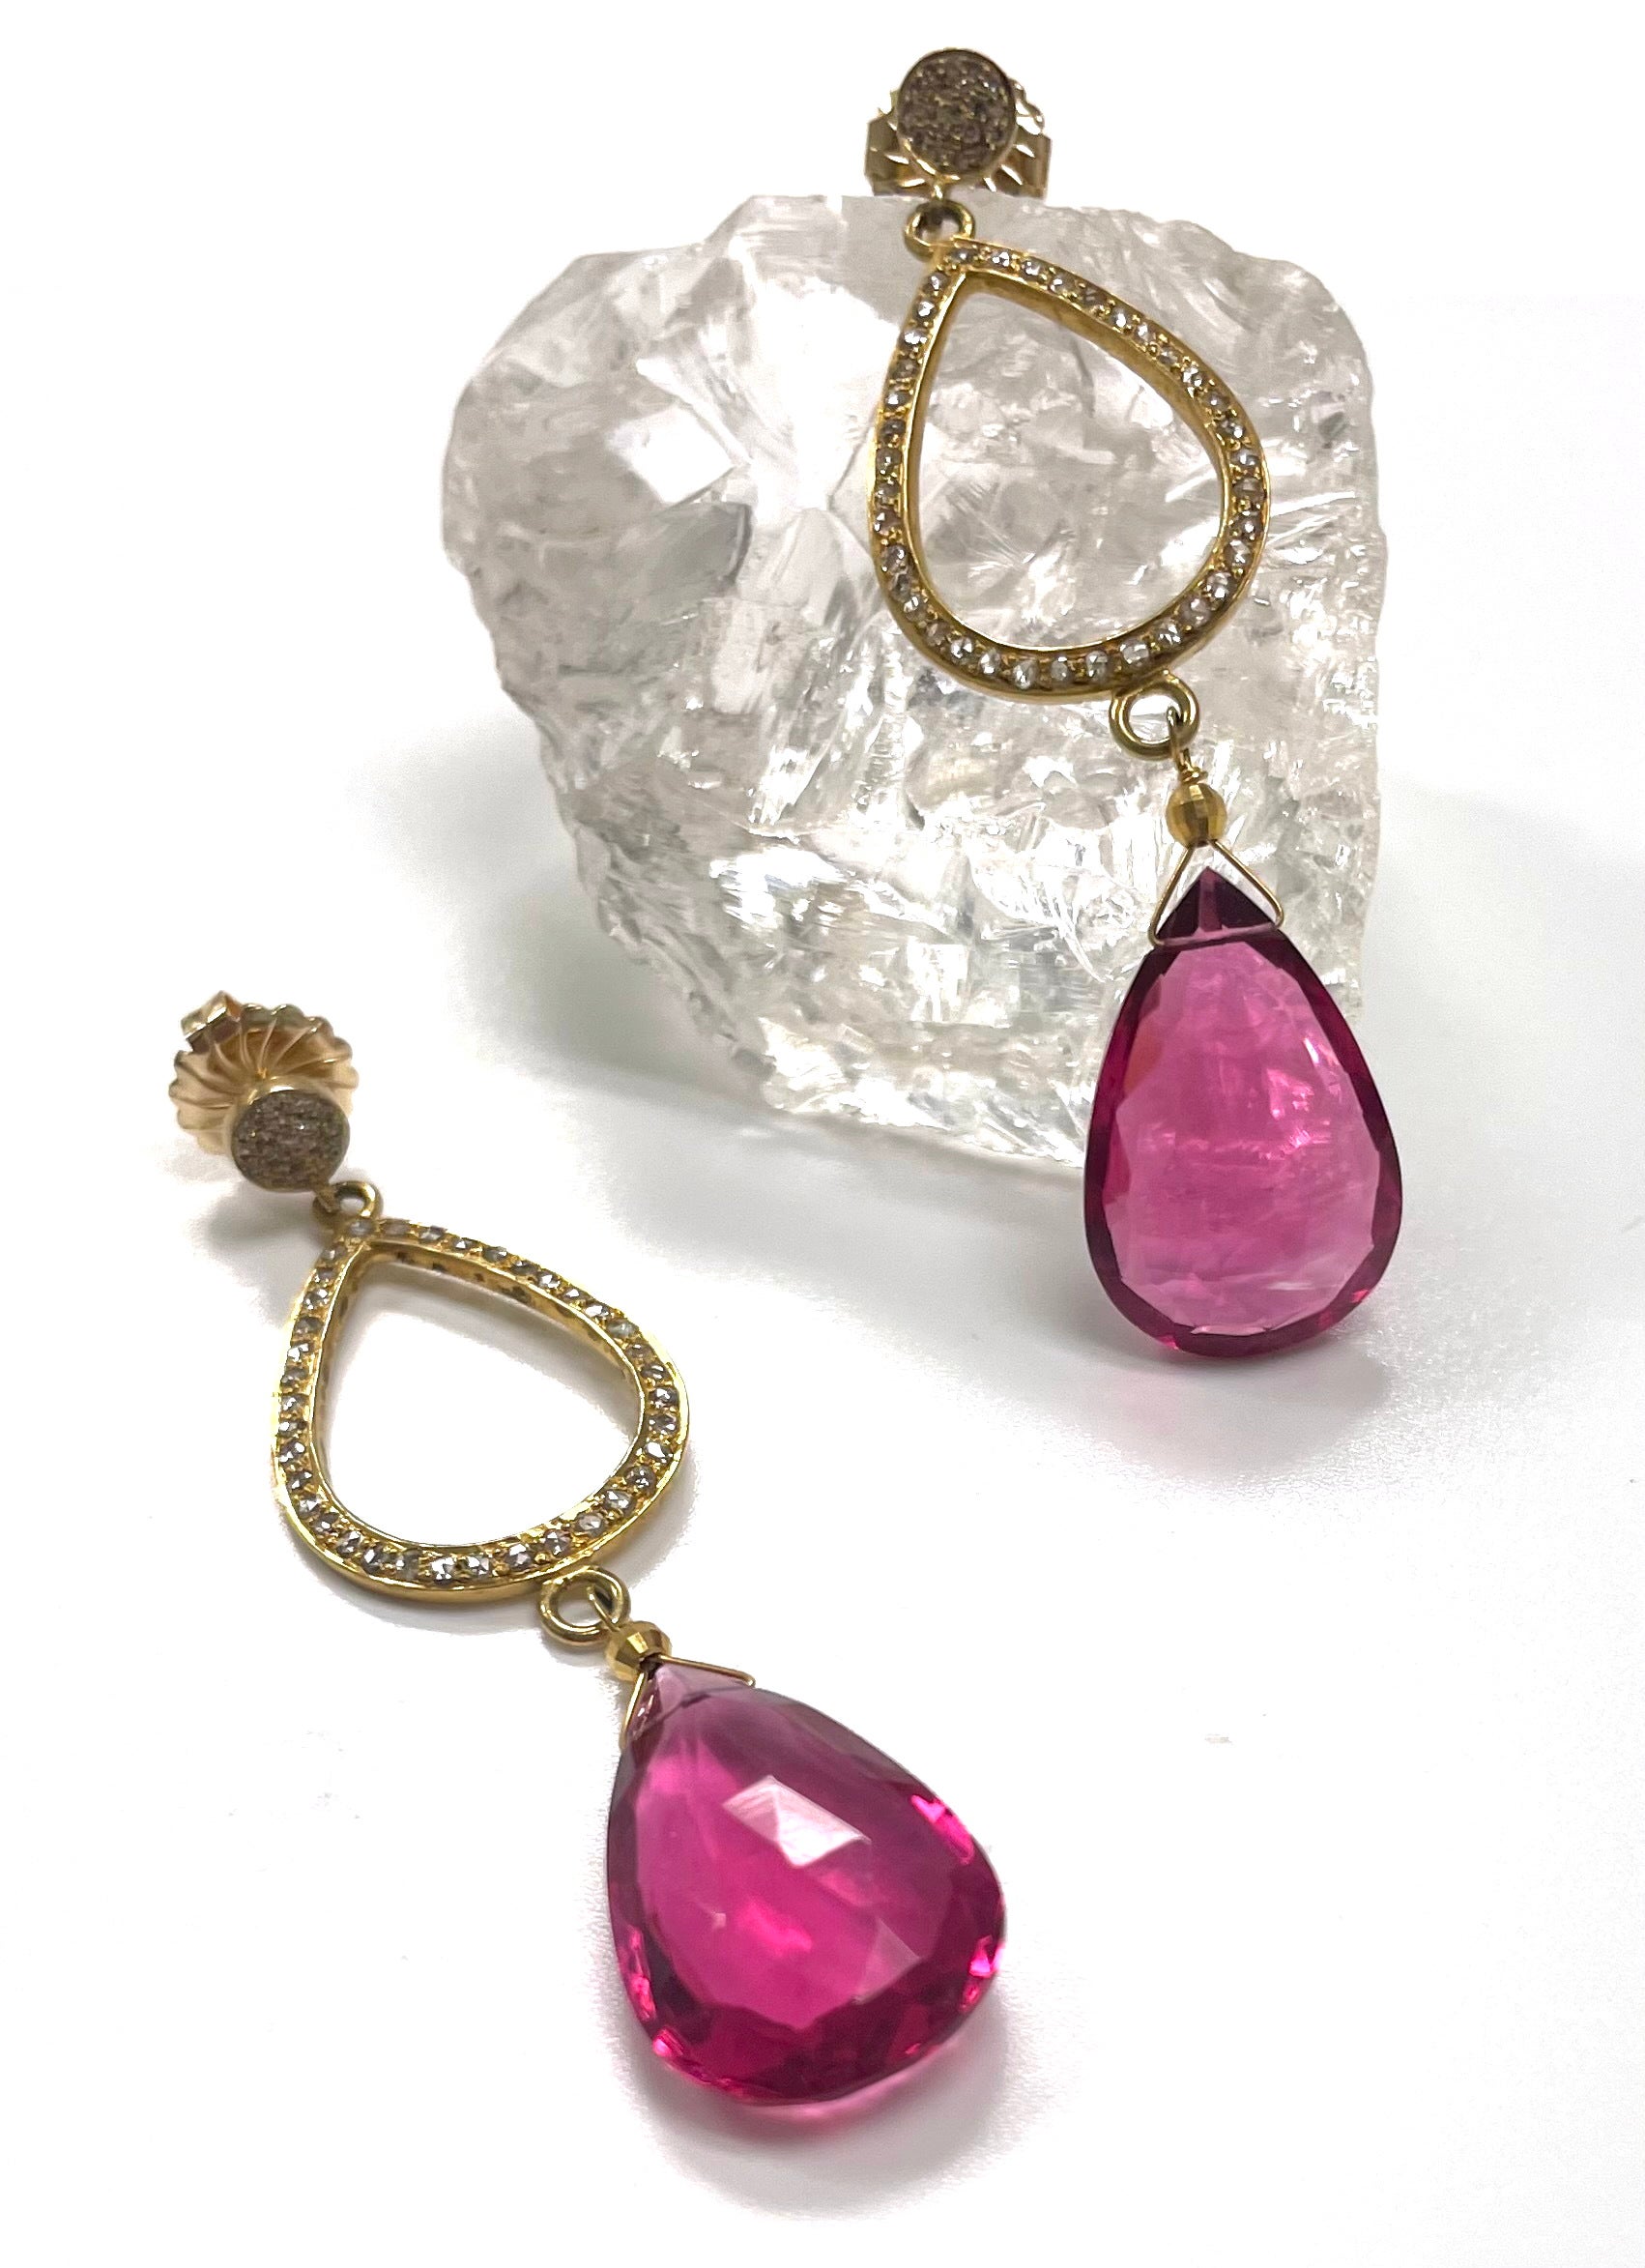 Description
Vibrant hot pink faceted Hydro Quartz pear shape drops, suspended from pave diamond stud posts and teardrop shape pave diamond adornments. 
Item # E3313
Check out matching necklace (see photos), Item # N3709, $6,600.

Materials and